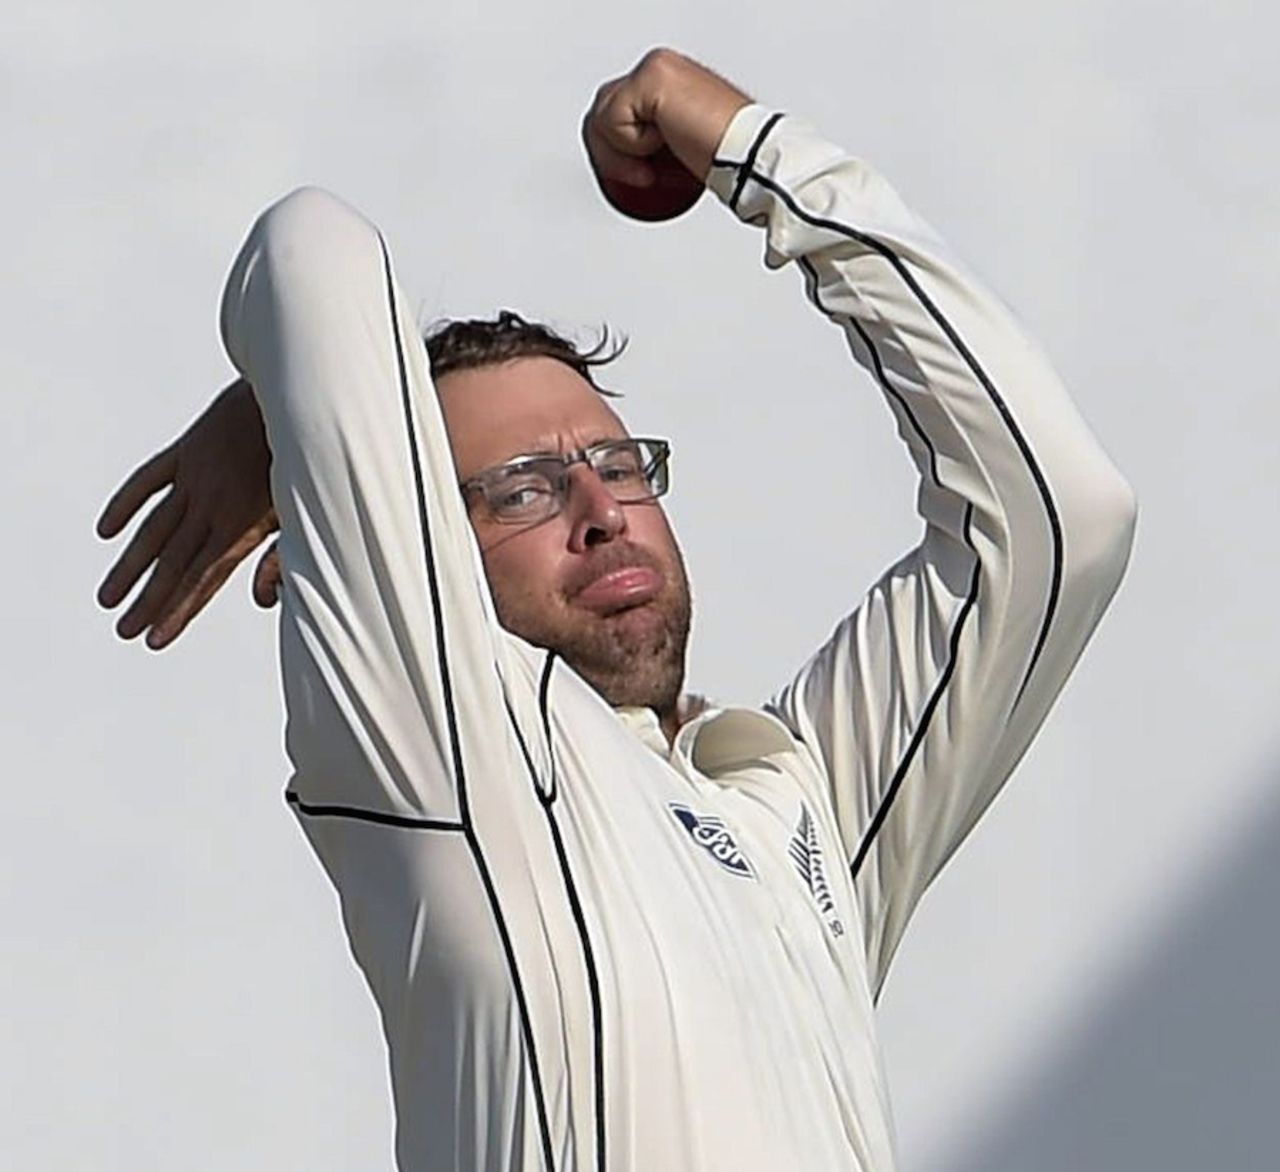 Daniel Vettori was called in to bowl first change, Pakistan v New Zealand, 3rd Test, Sharjah, 1st day, November 26, 2014